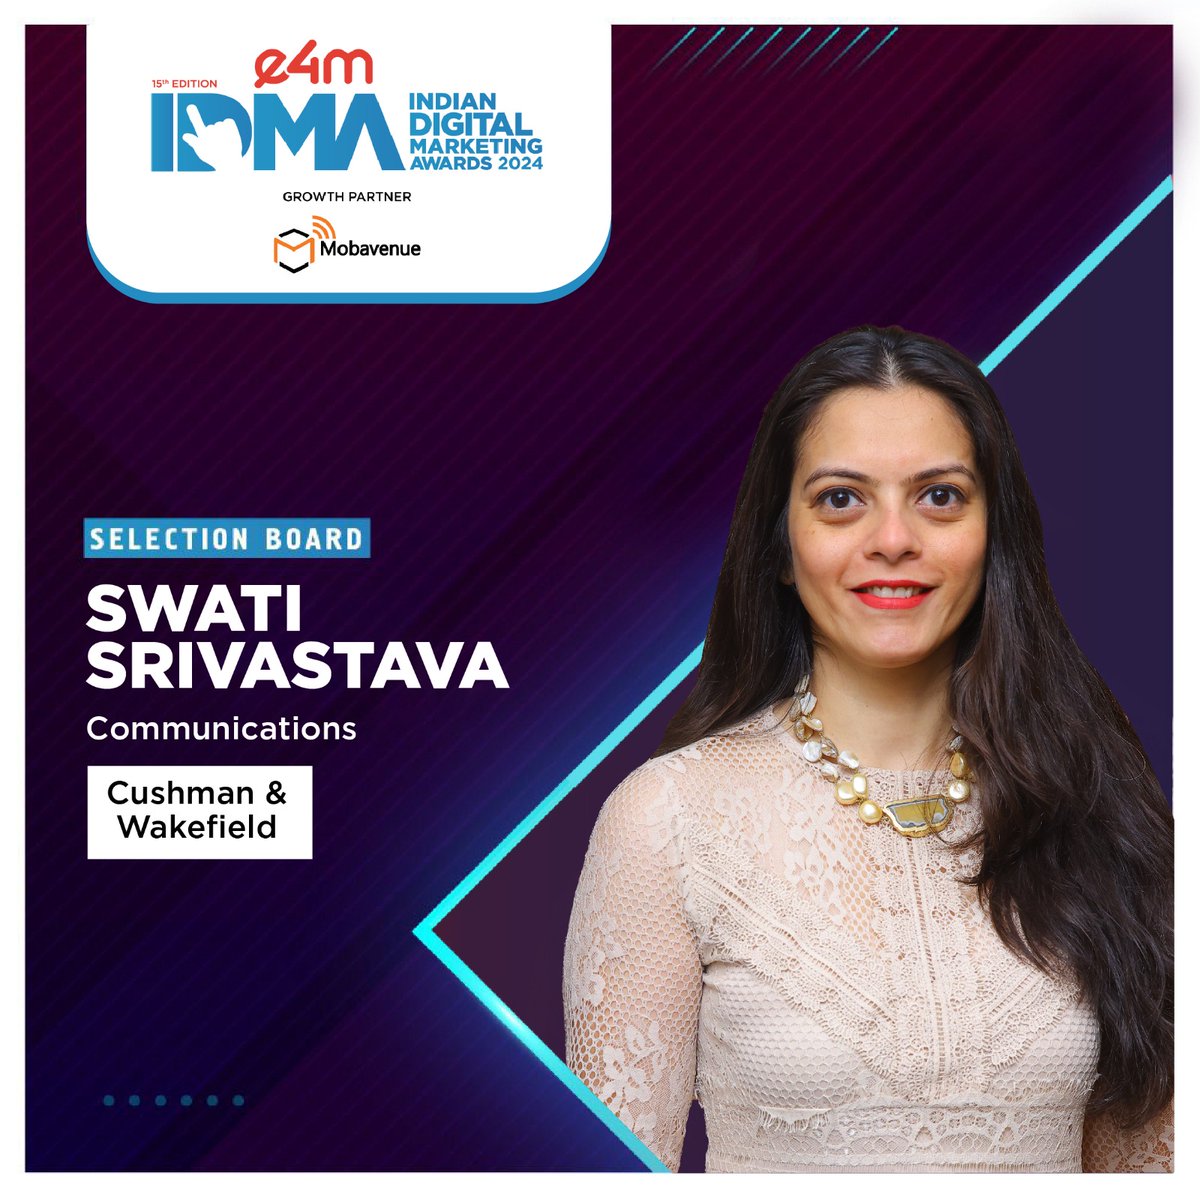 Let's extend a warm welcome to Ms. #SwatiSrivastava, Communication- @CushWake, as she joins our selection jury. We're excited to witness her expertise in digital marketing strategies as she helps us honor excellence at #e4mIDMA 2024! 🏆

Deadline - 25th May 2024

Register here-